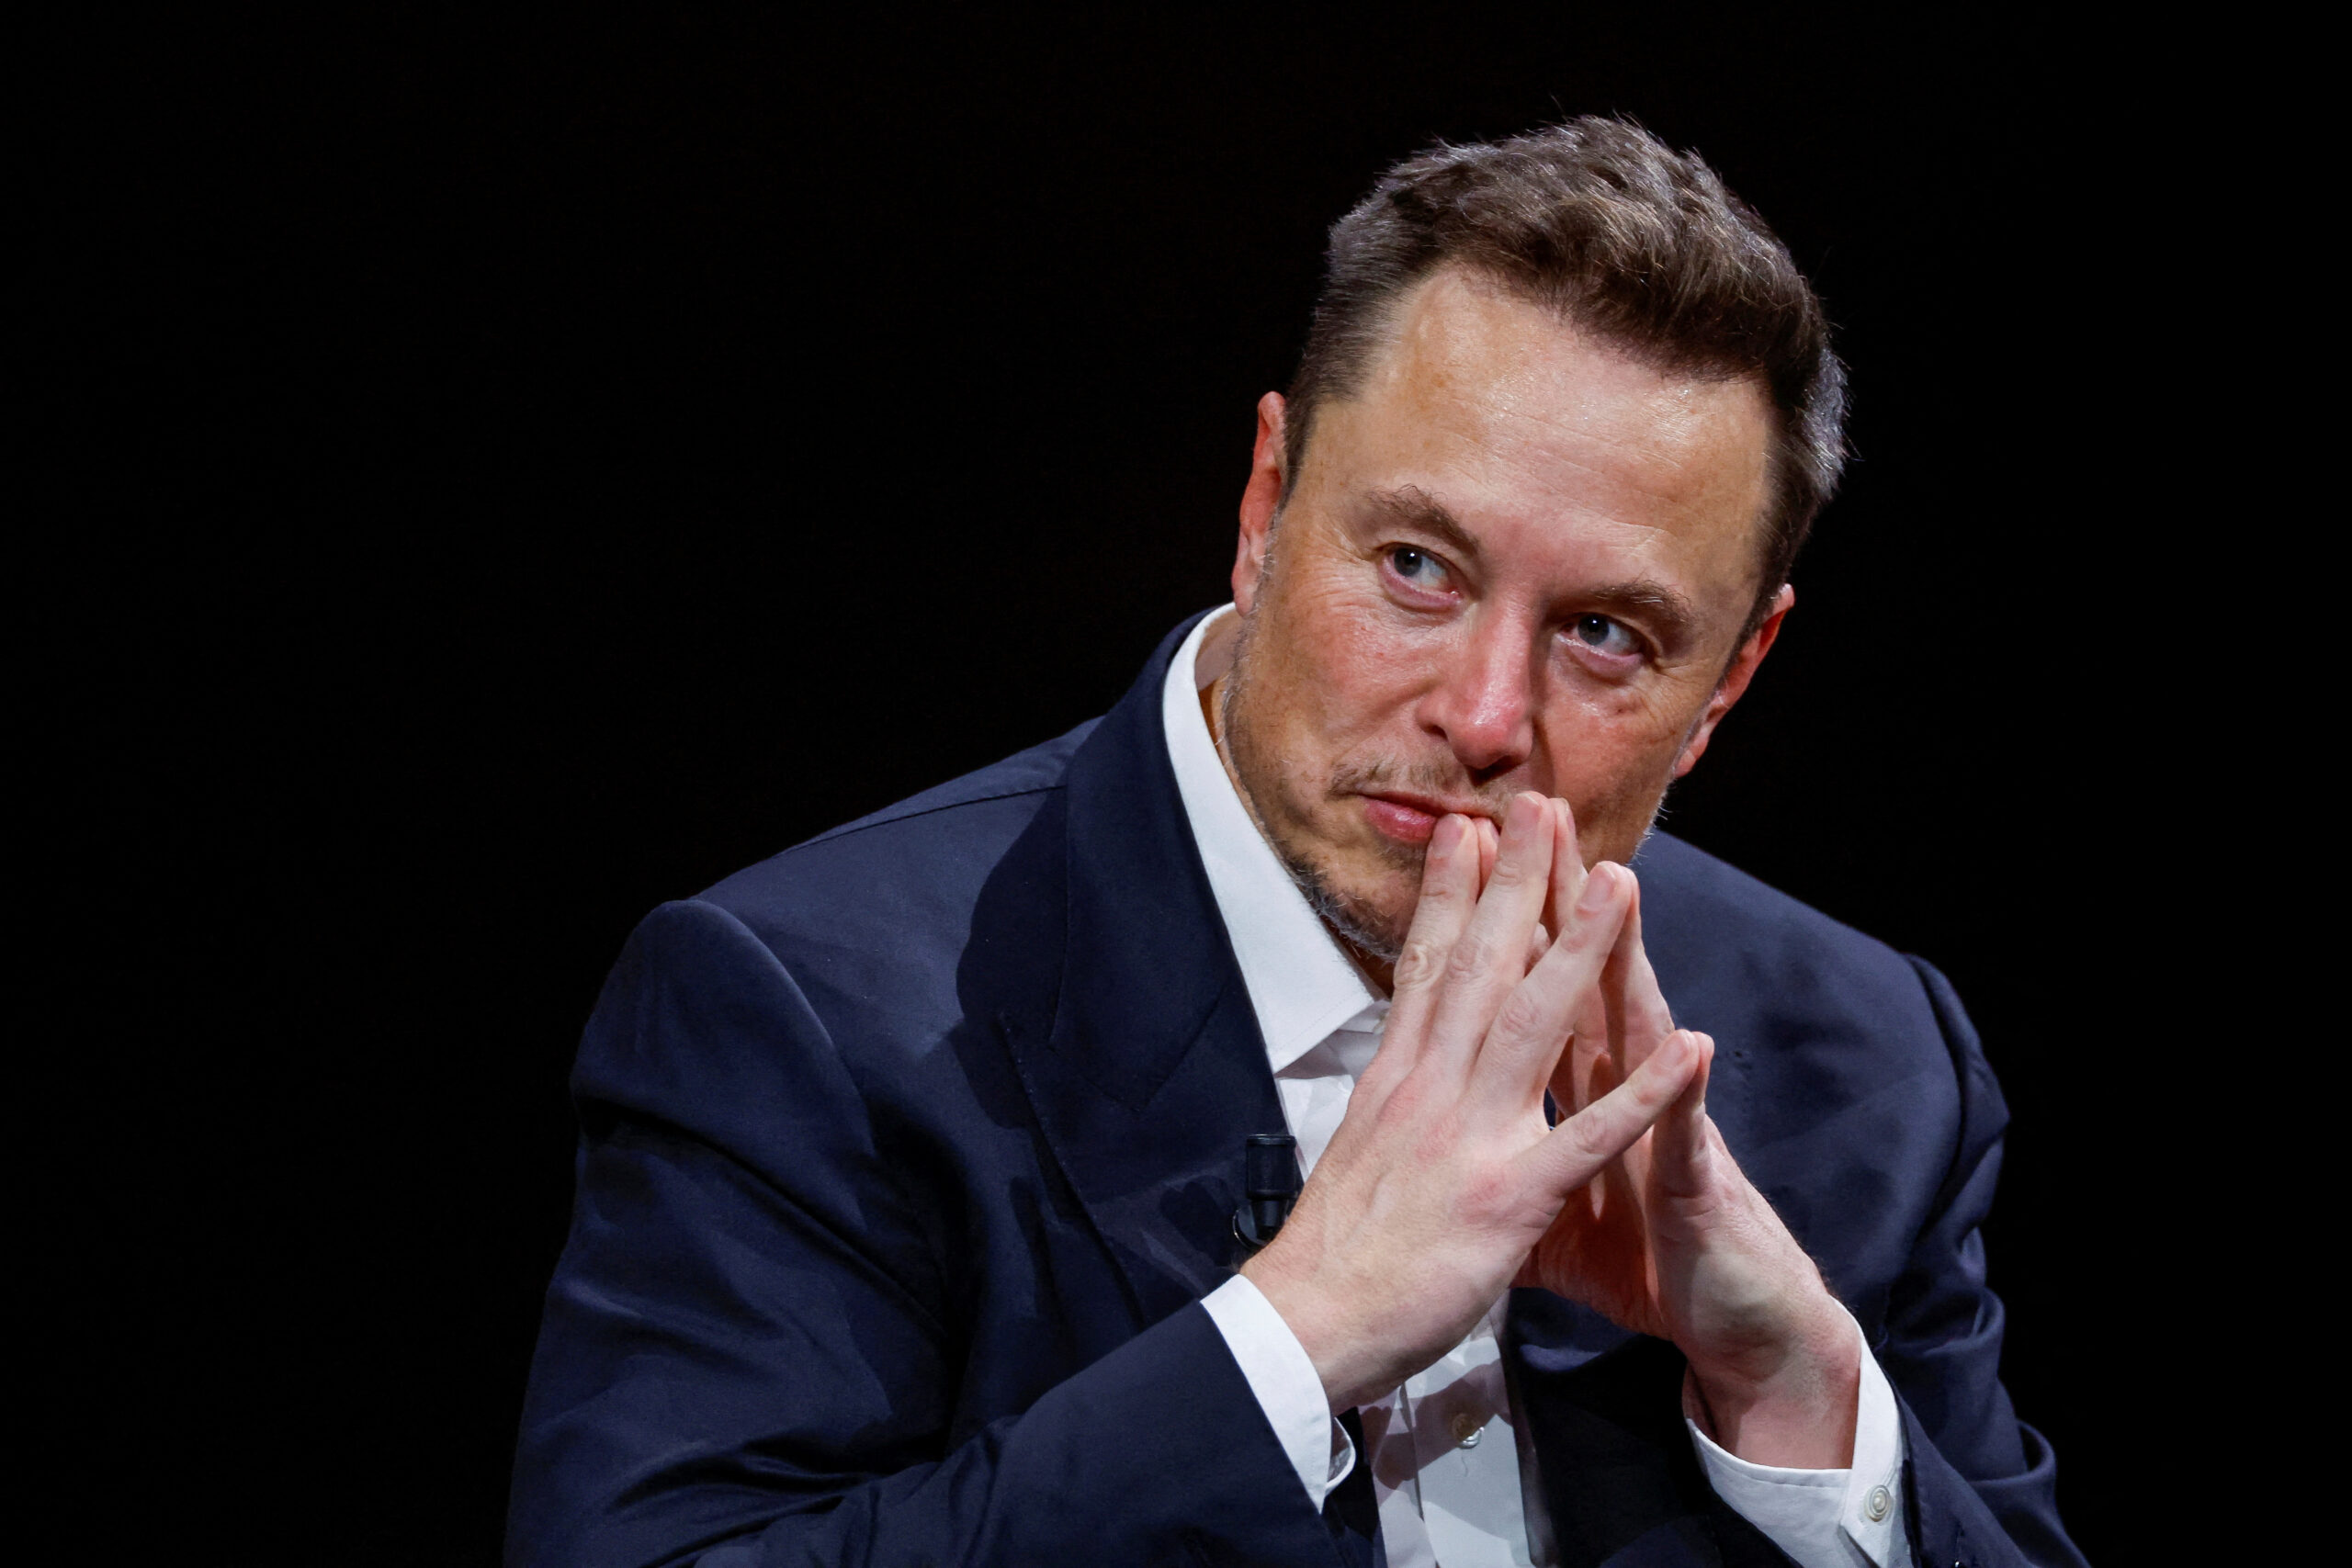 “Took Longer Than I Expected”: Elon Musk Comments on Death of Wagner Leader